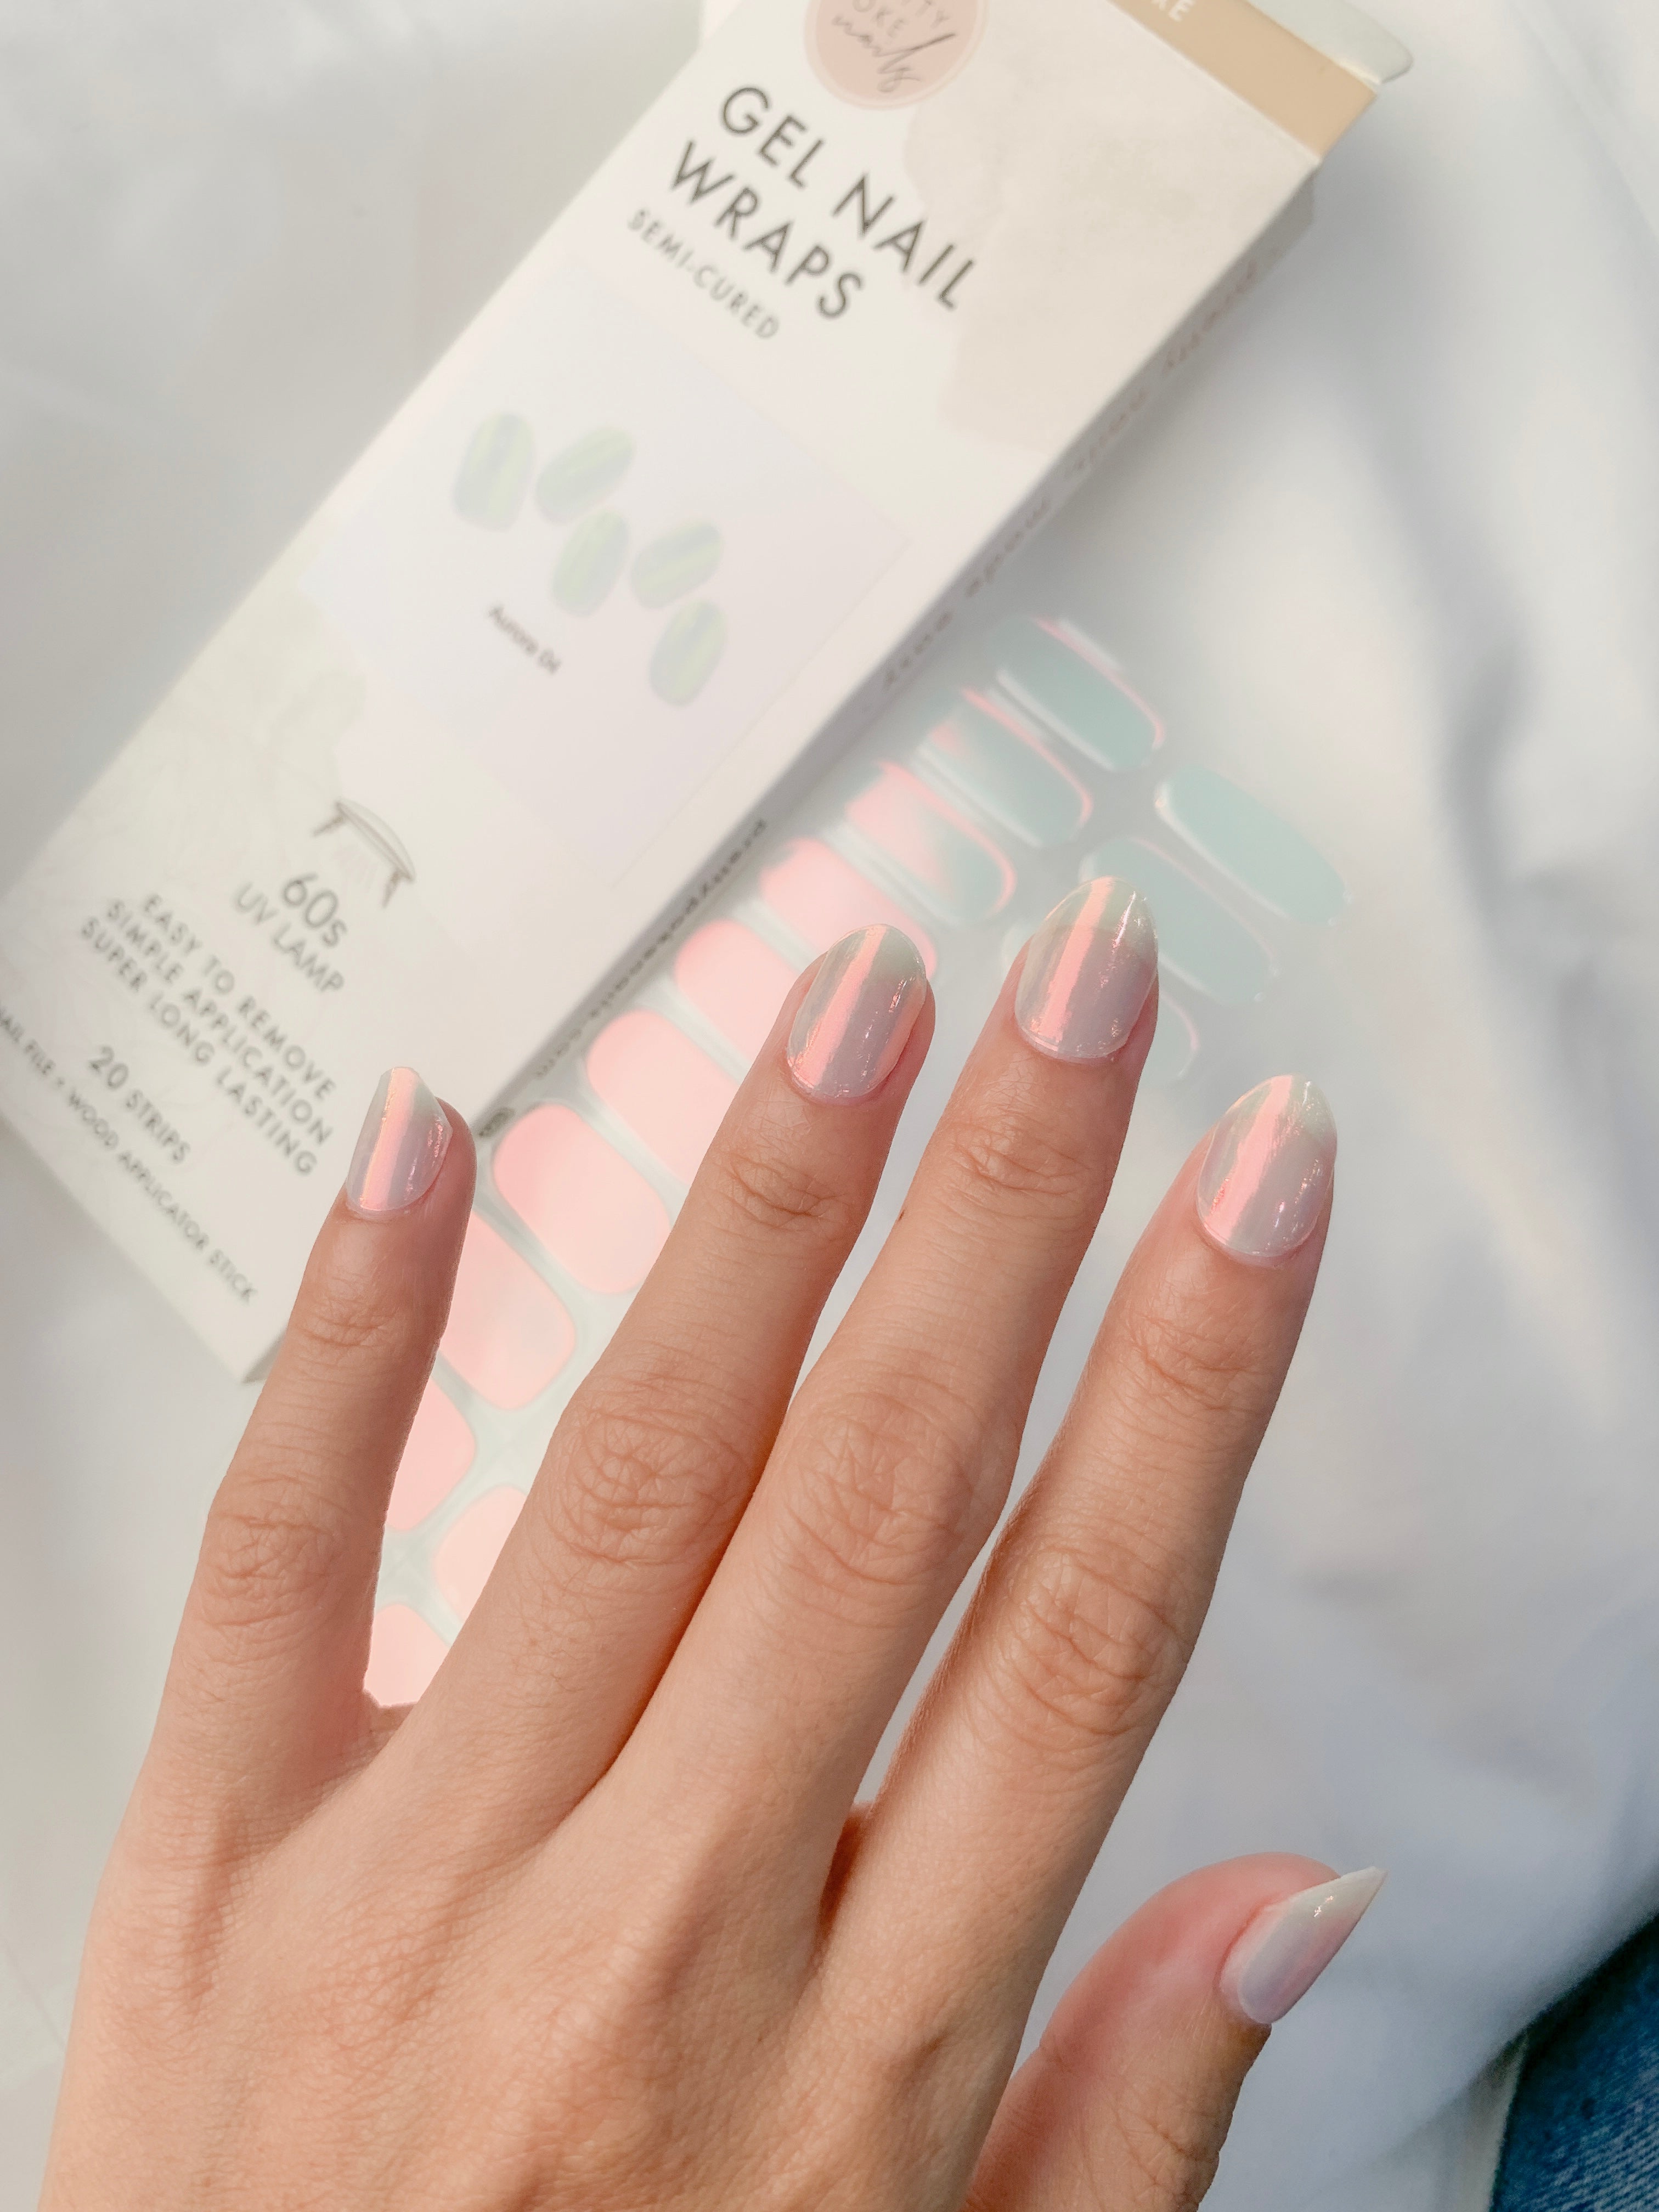 What nail color goes best with a forest green dress? - Quora